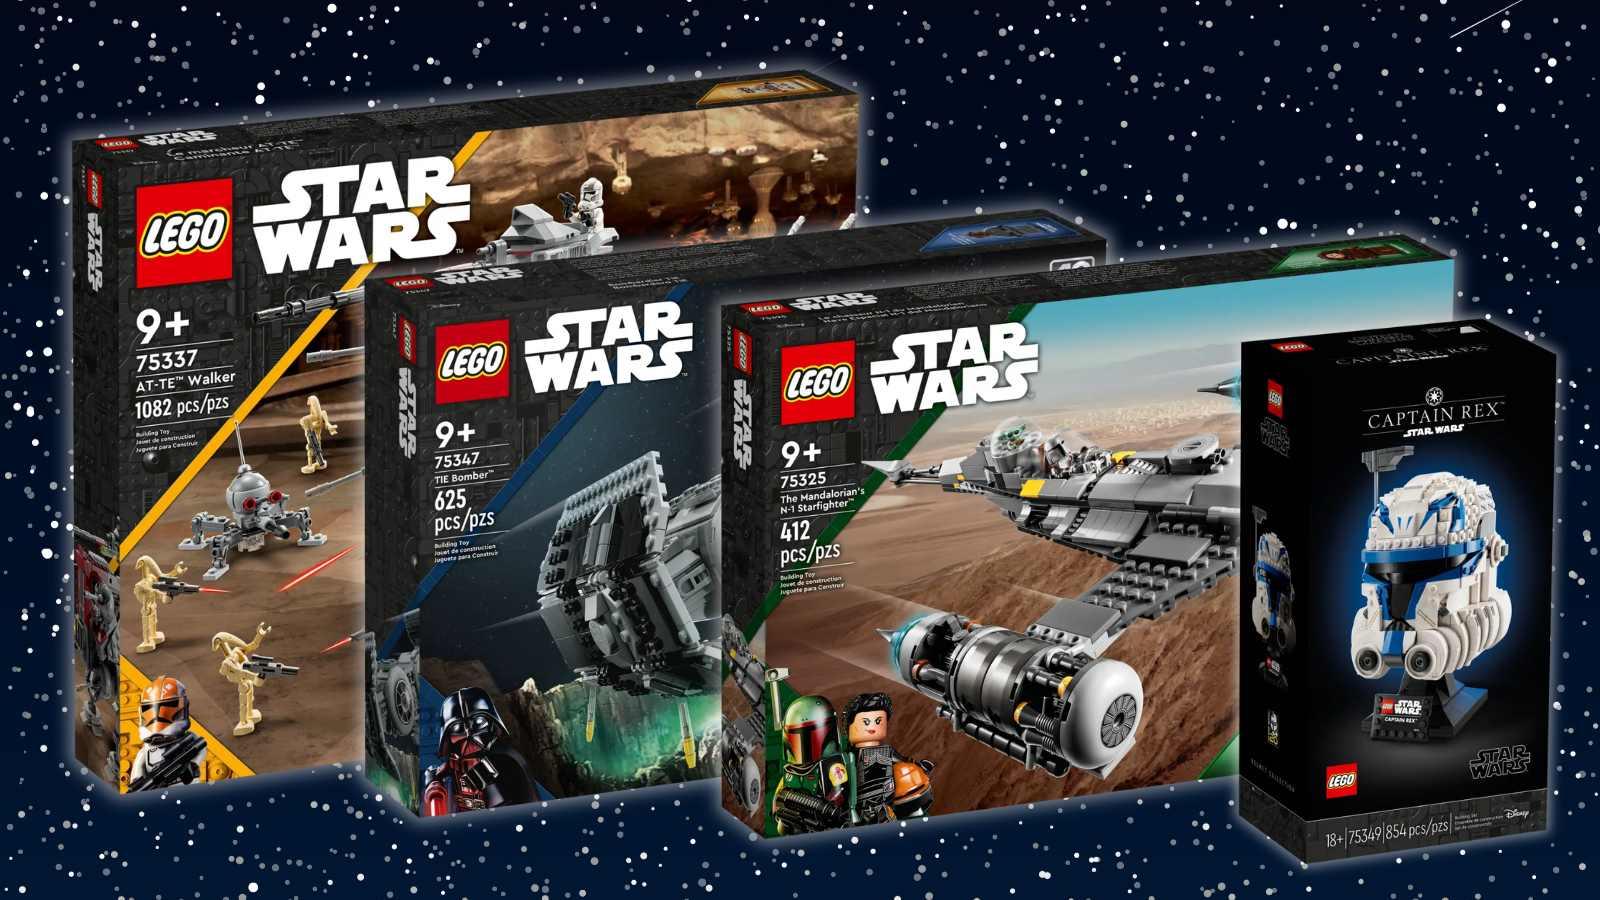 LEGO Star Wars sets on a space background.